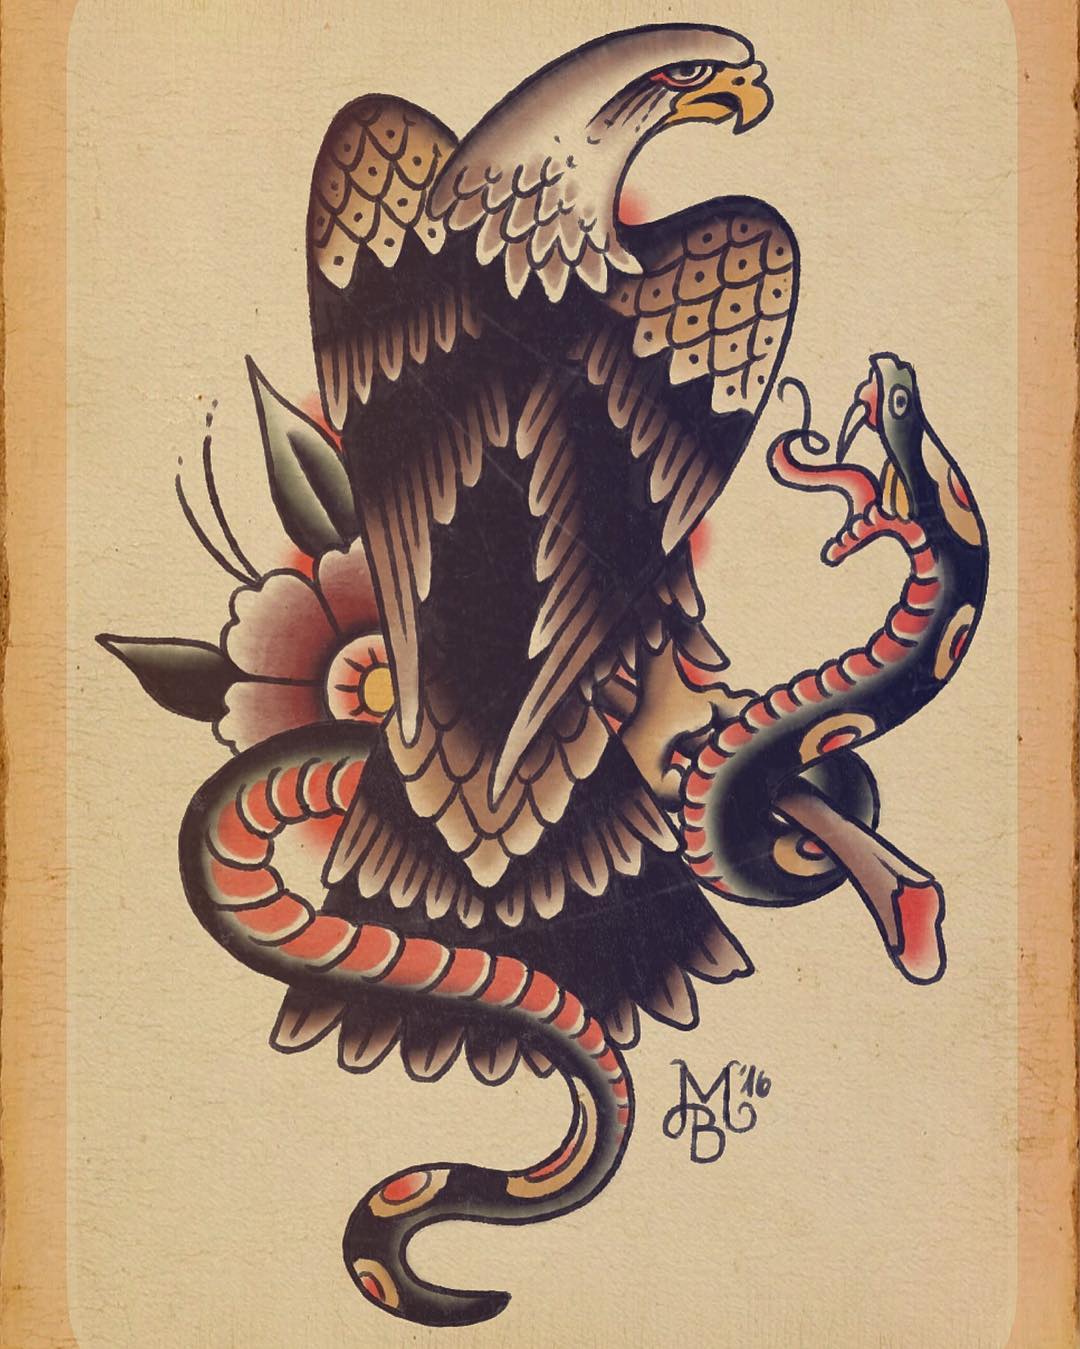 Triumphant eagle over subdued snake on scratched card board,
if you want this fo